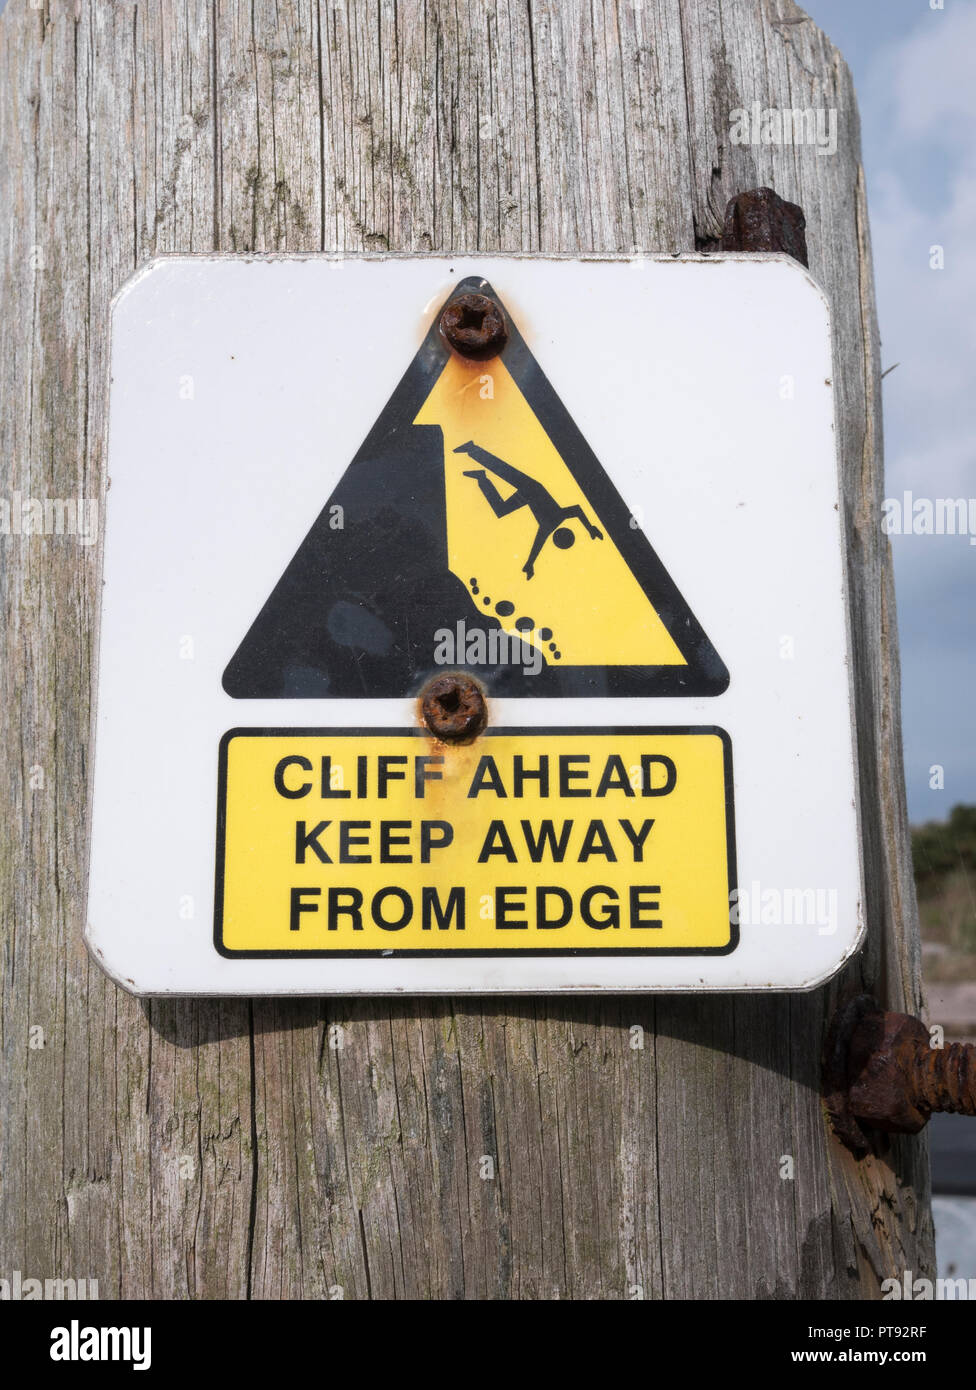 Cliff danger warning sign. Keep away from the cliff edge concept, falling off, falling man pictogram. Stock Photo